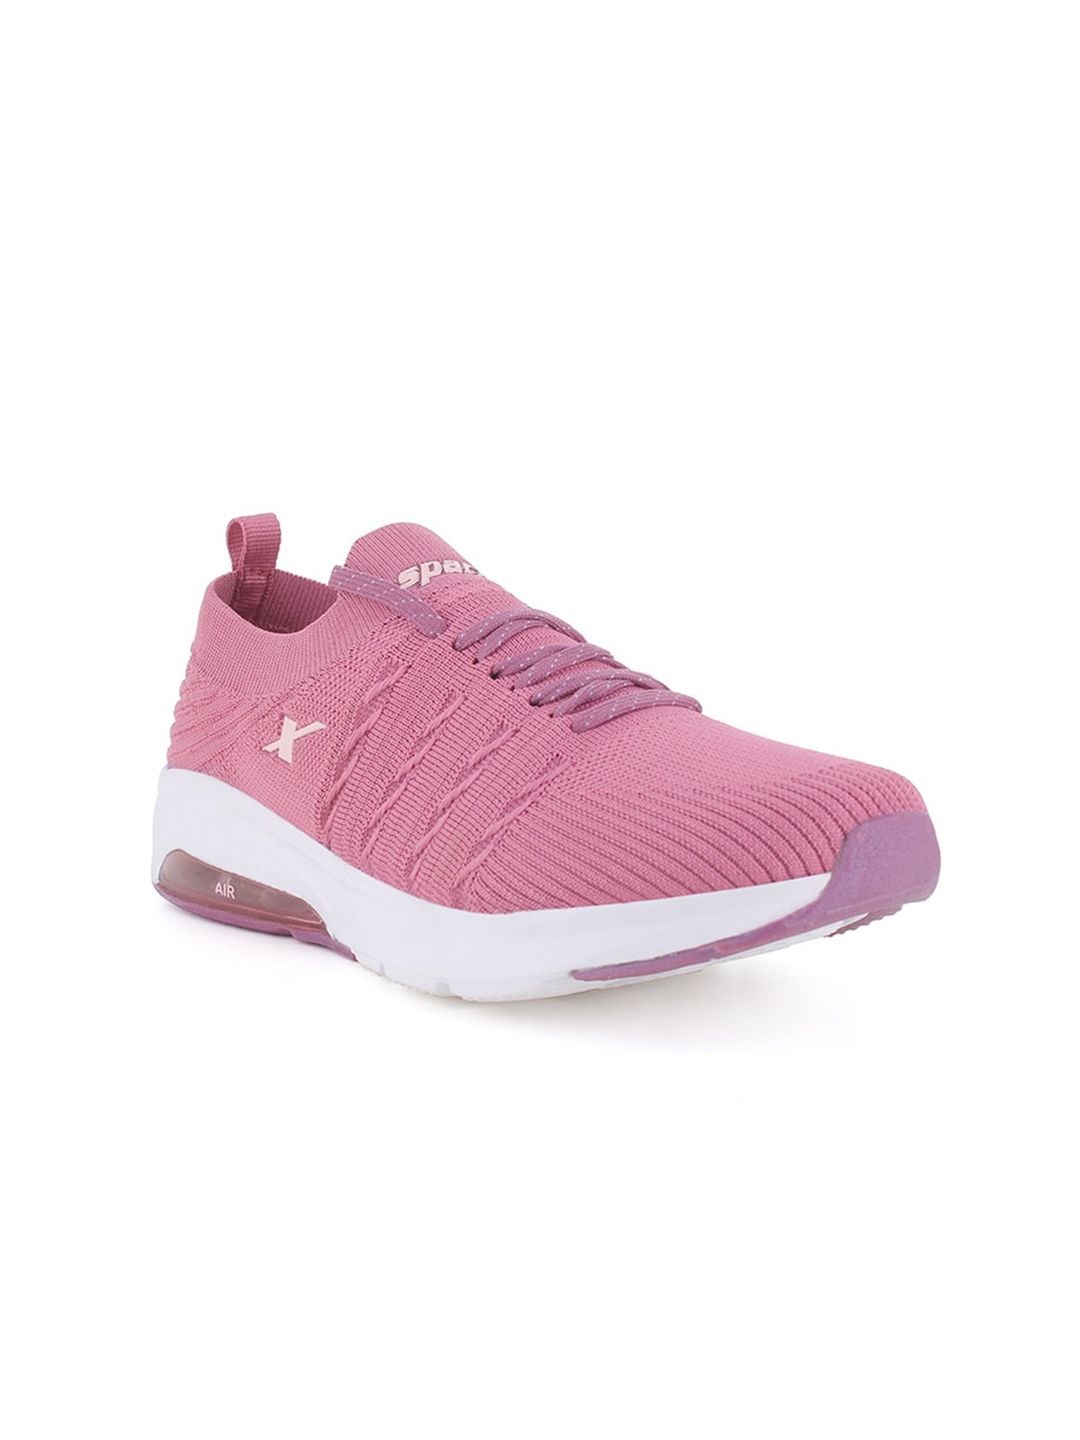 Sparx Women SL-209 Non-Marking Running Shoes Price in India